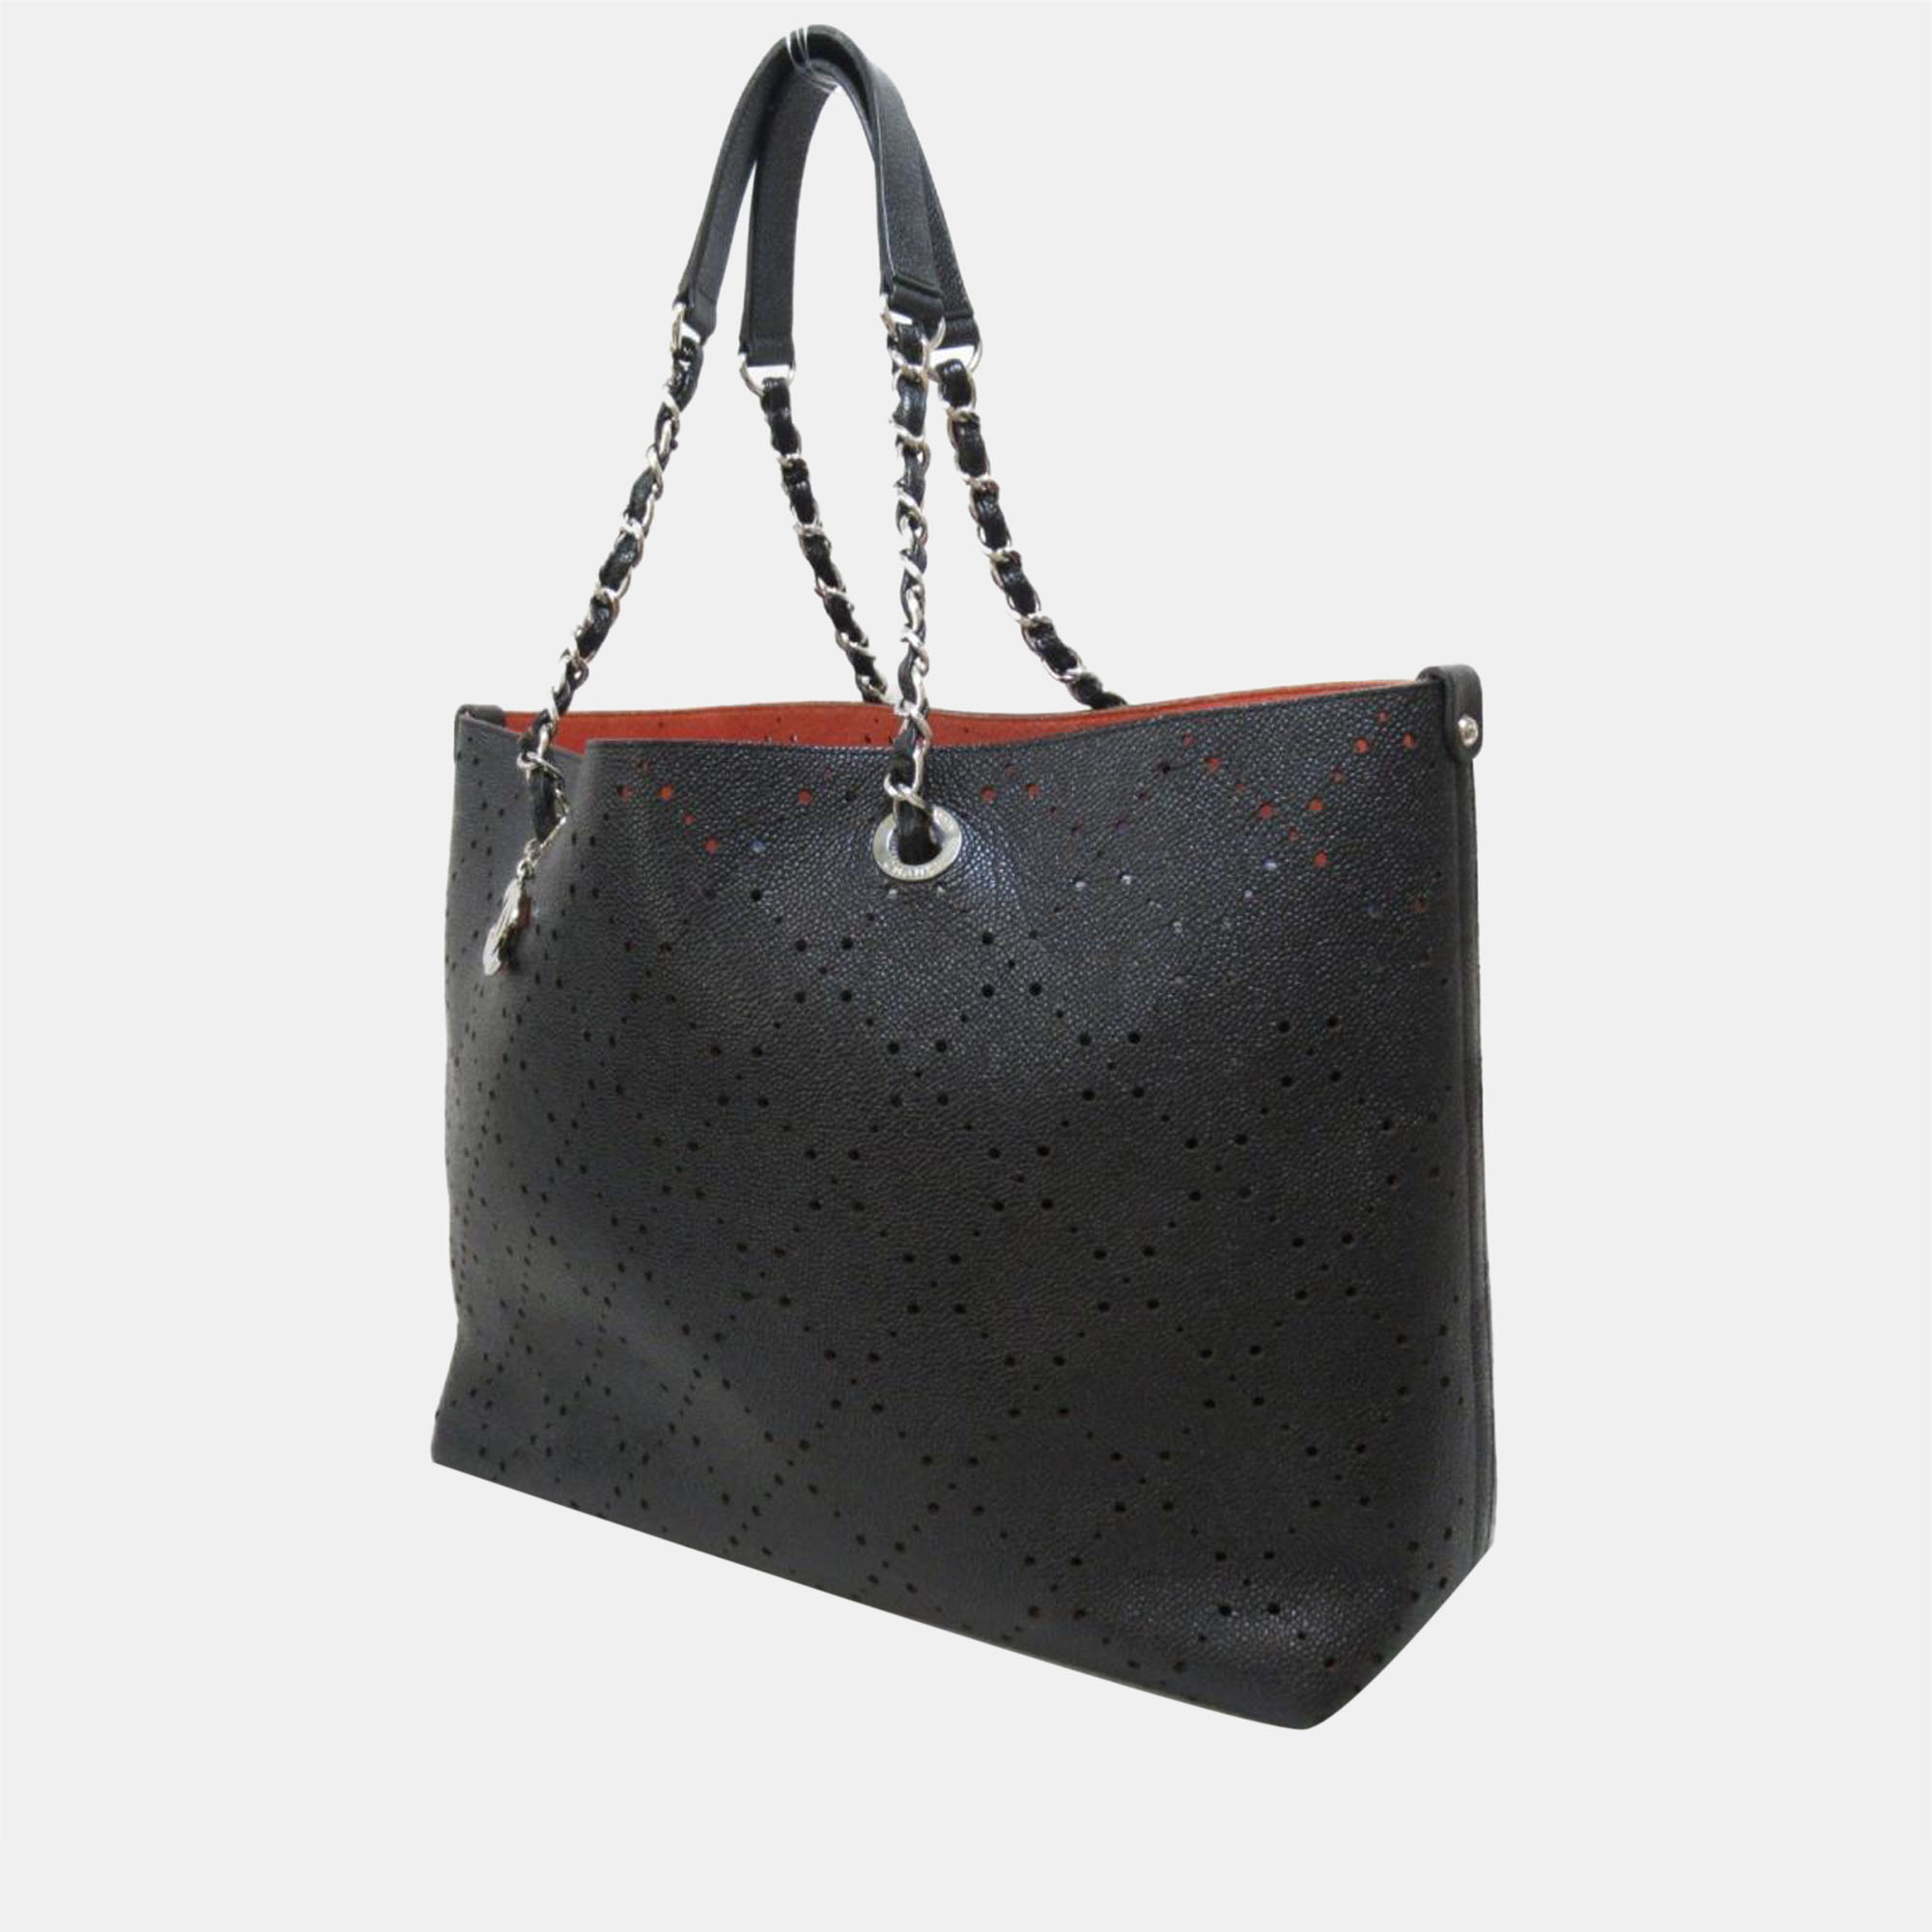 

Chanel Black Leather CC Perforated Tote Bag